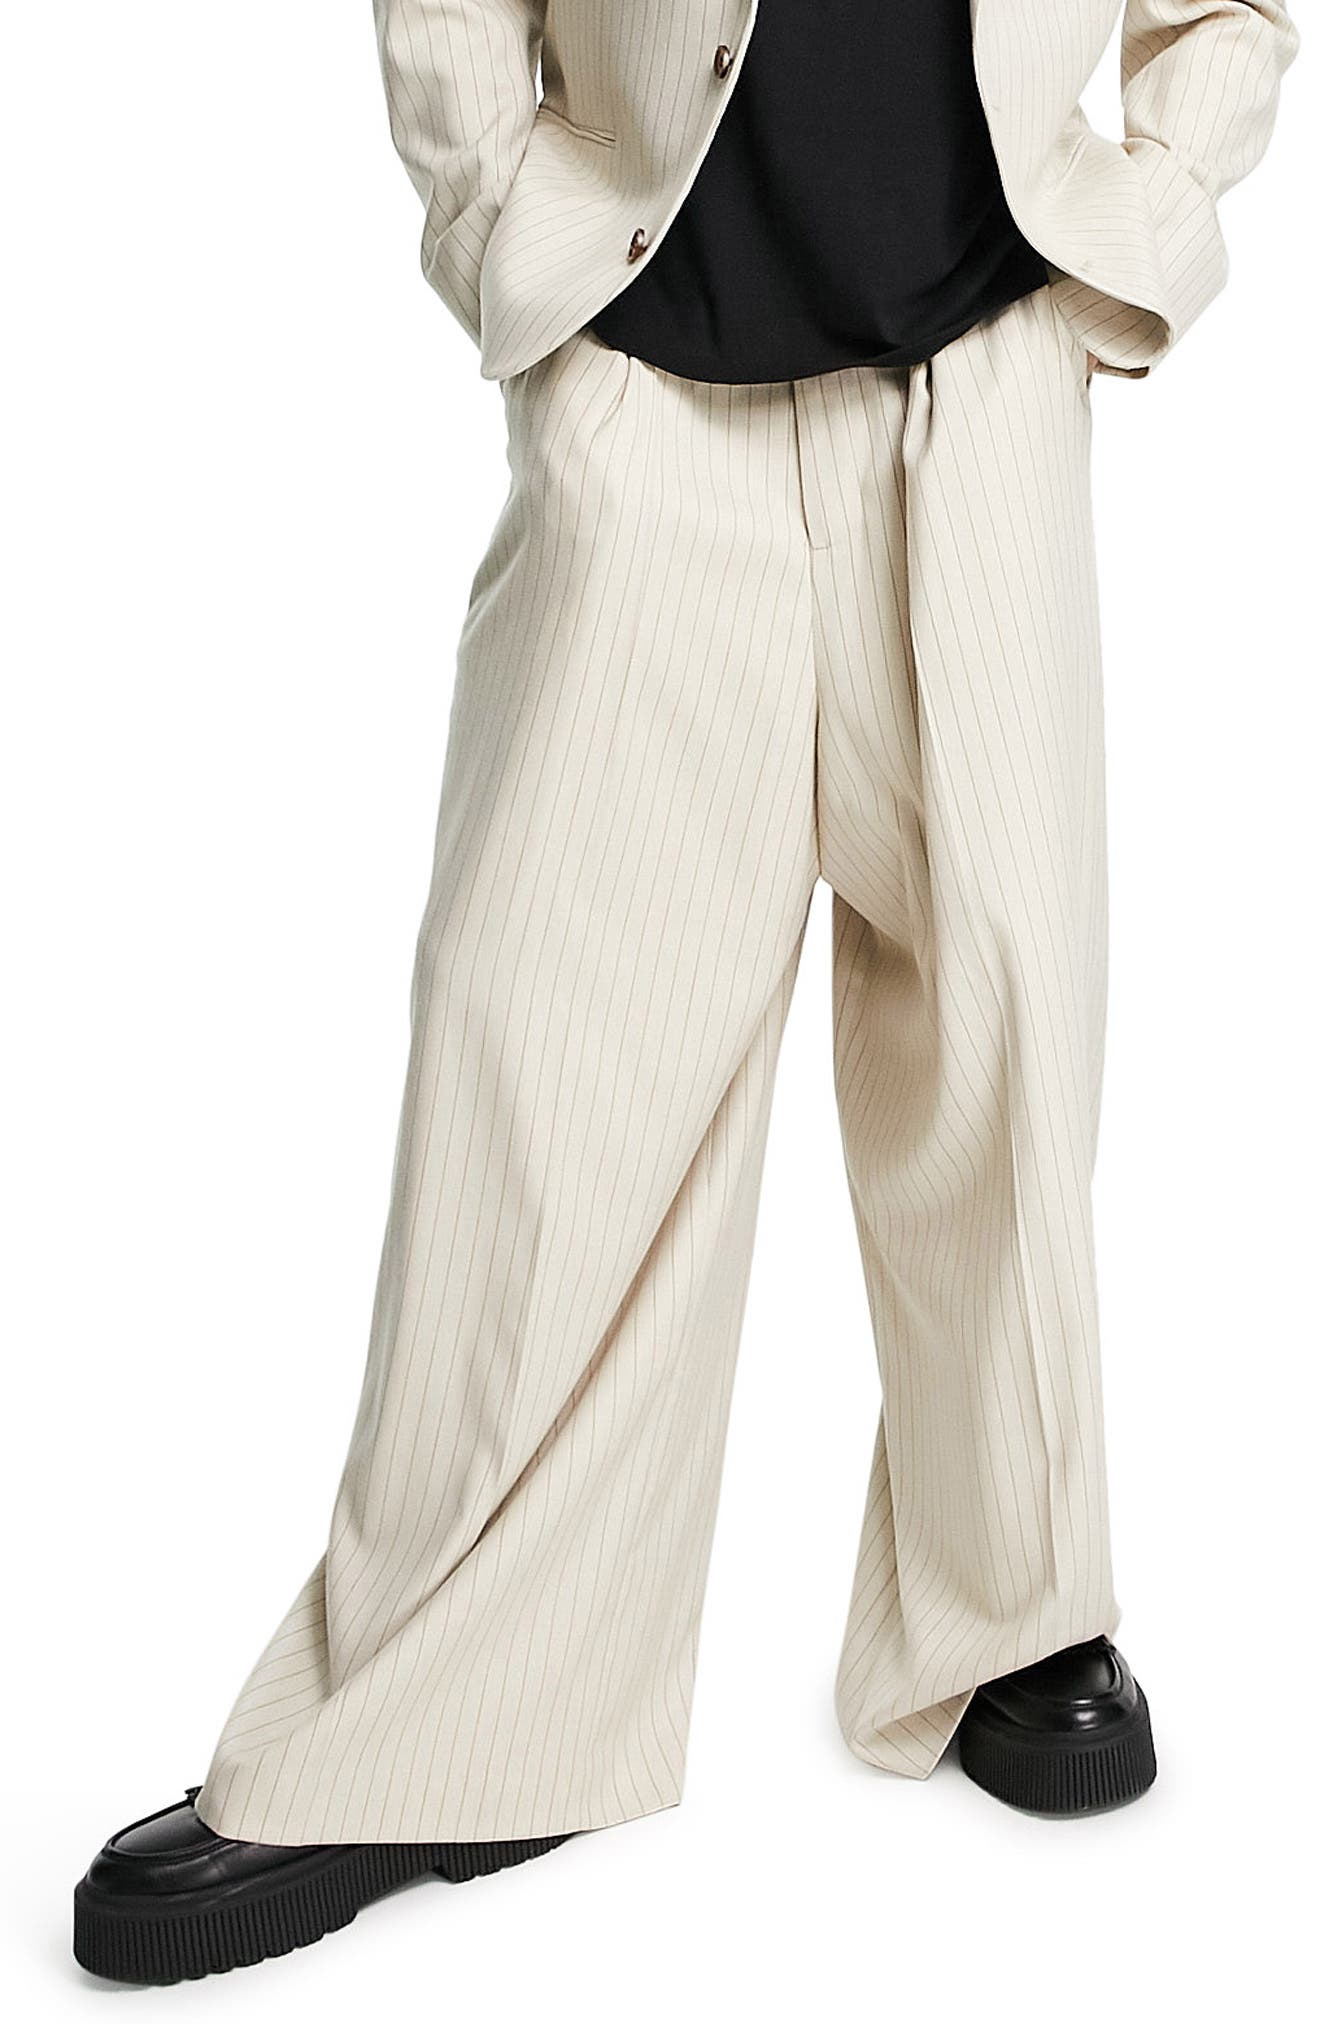 for Men Roda Cotton Suit in Beige Natural Mens Clothing Suits Two-piece suits 